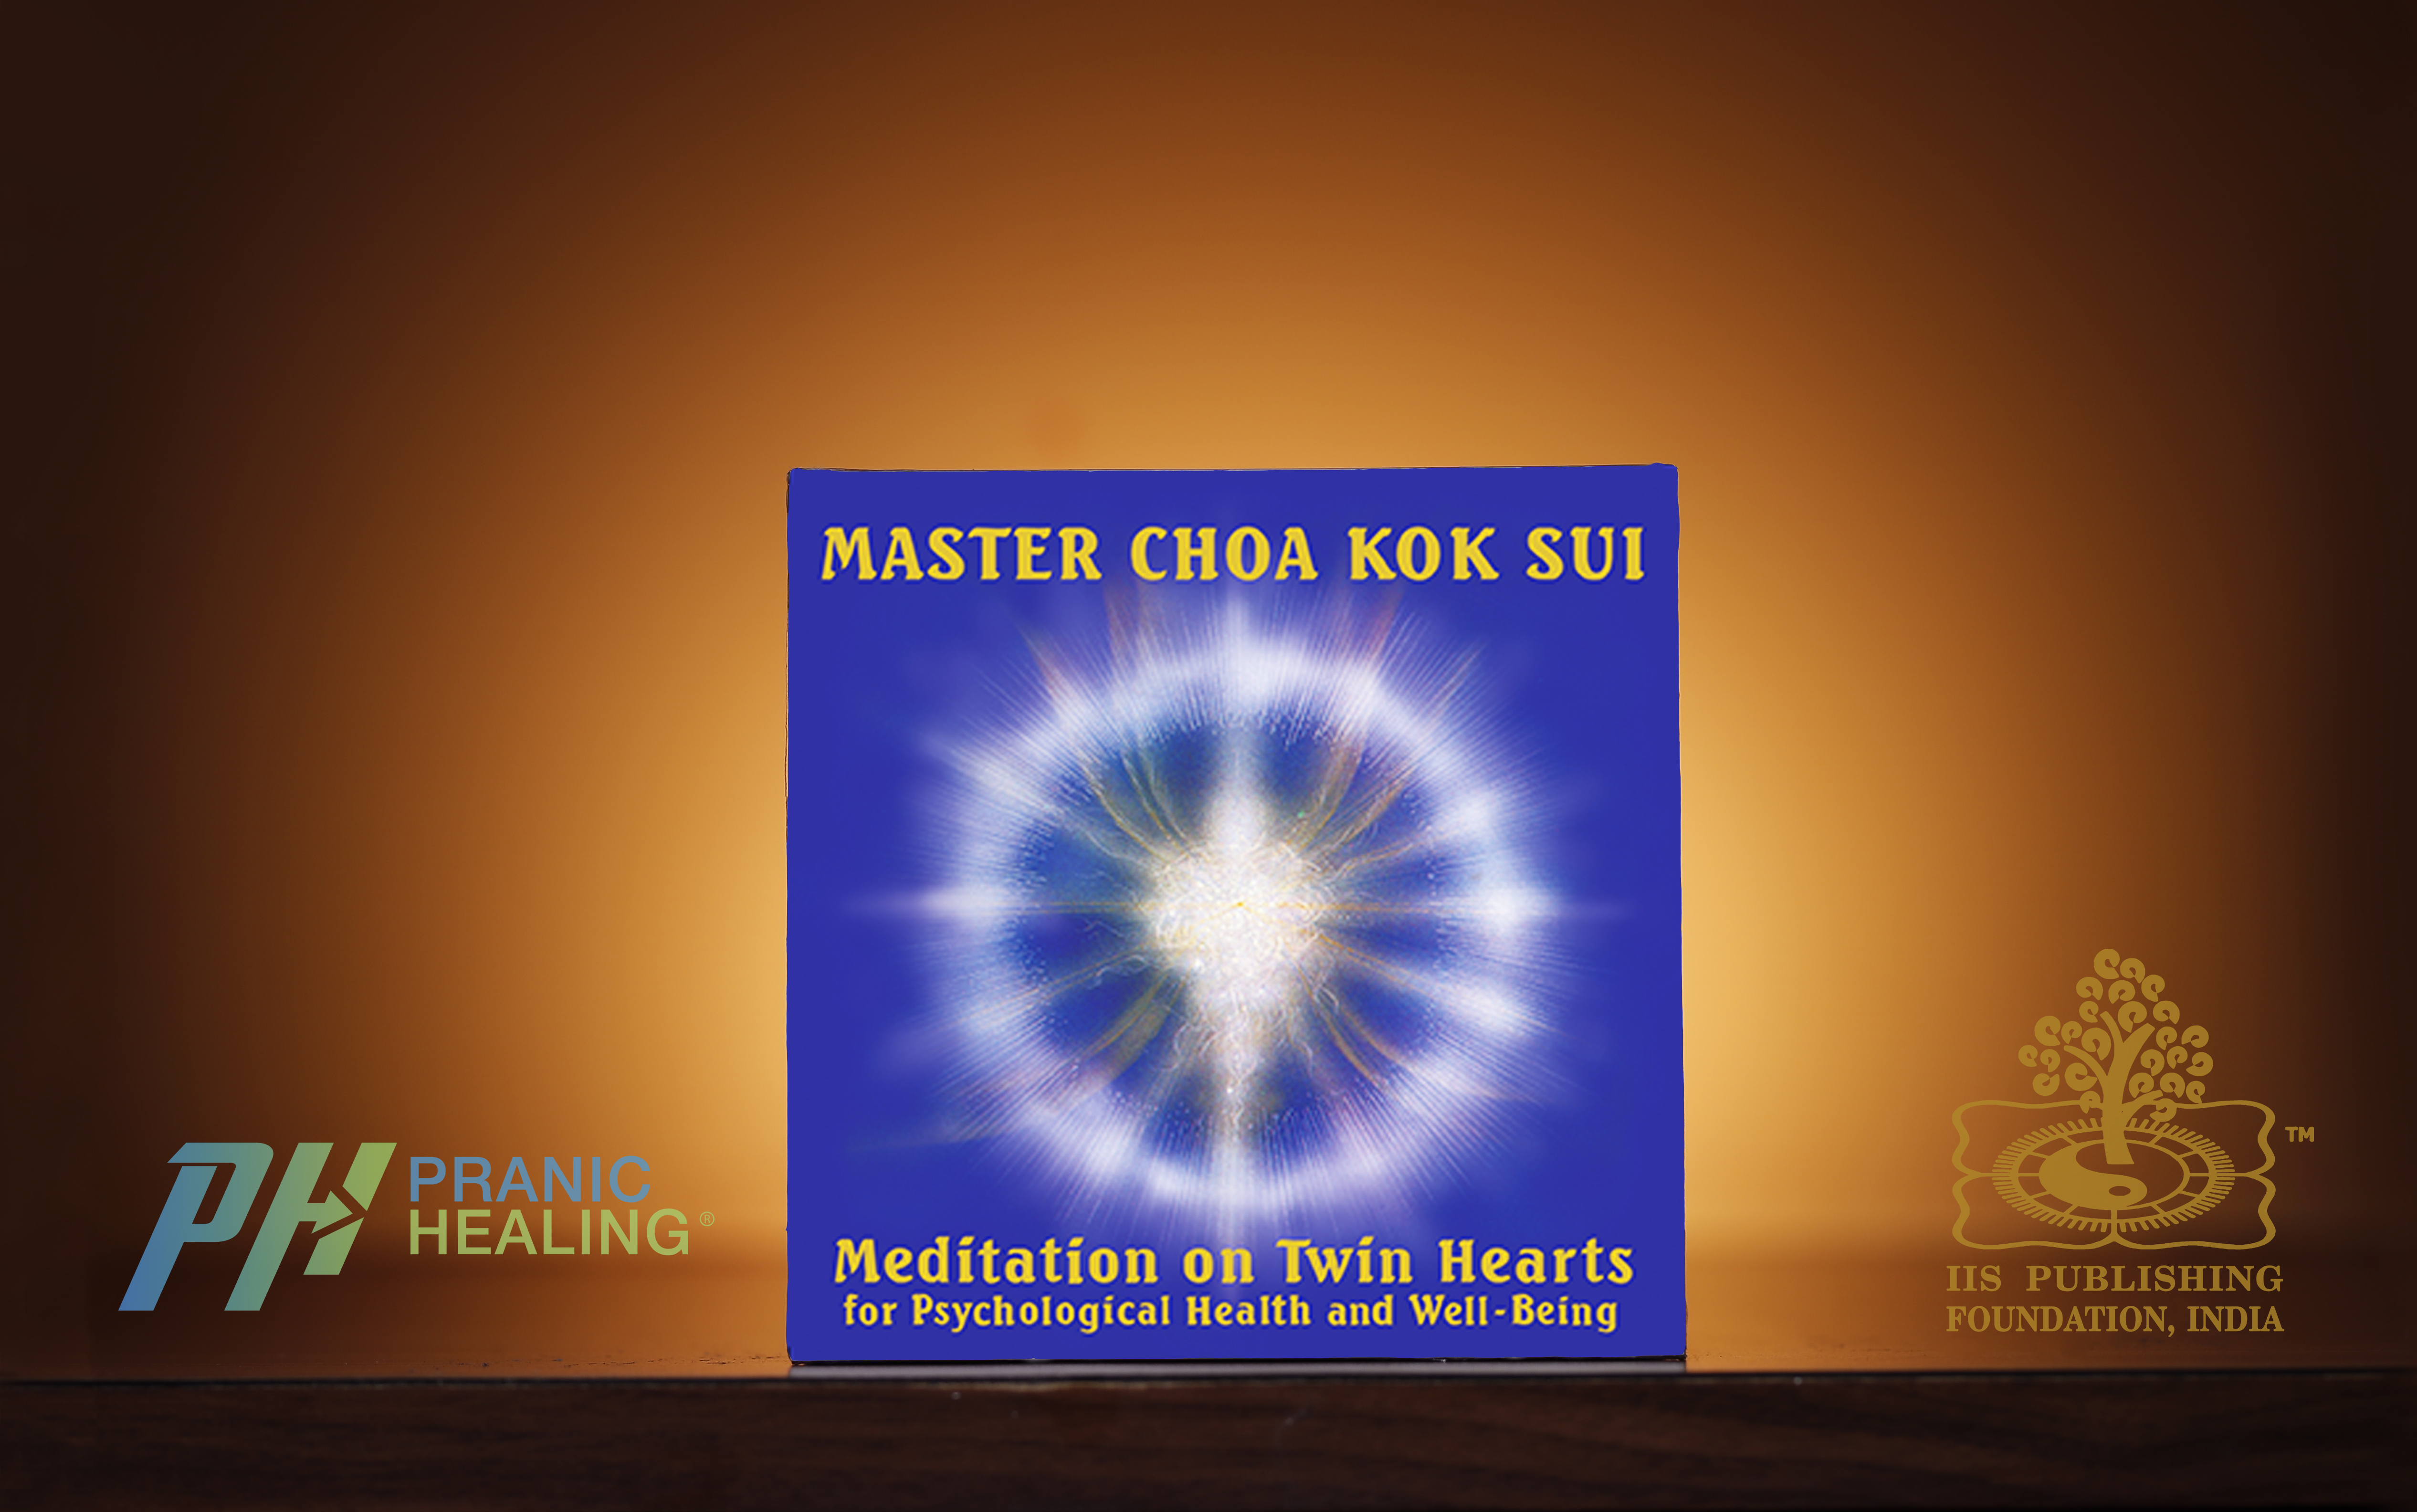 Meditation on Twin Hearts for Psychological Health and Well Being - English / Hindi